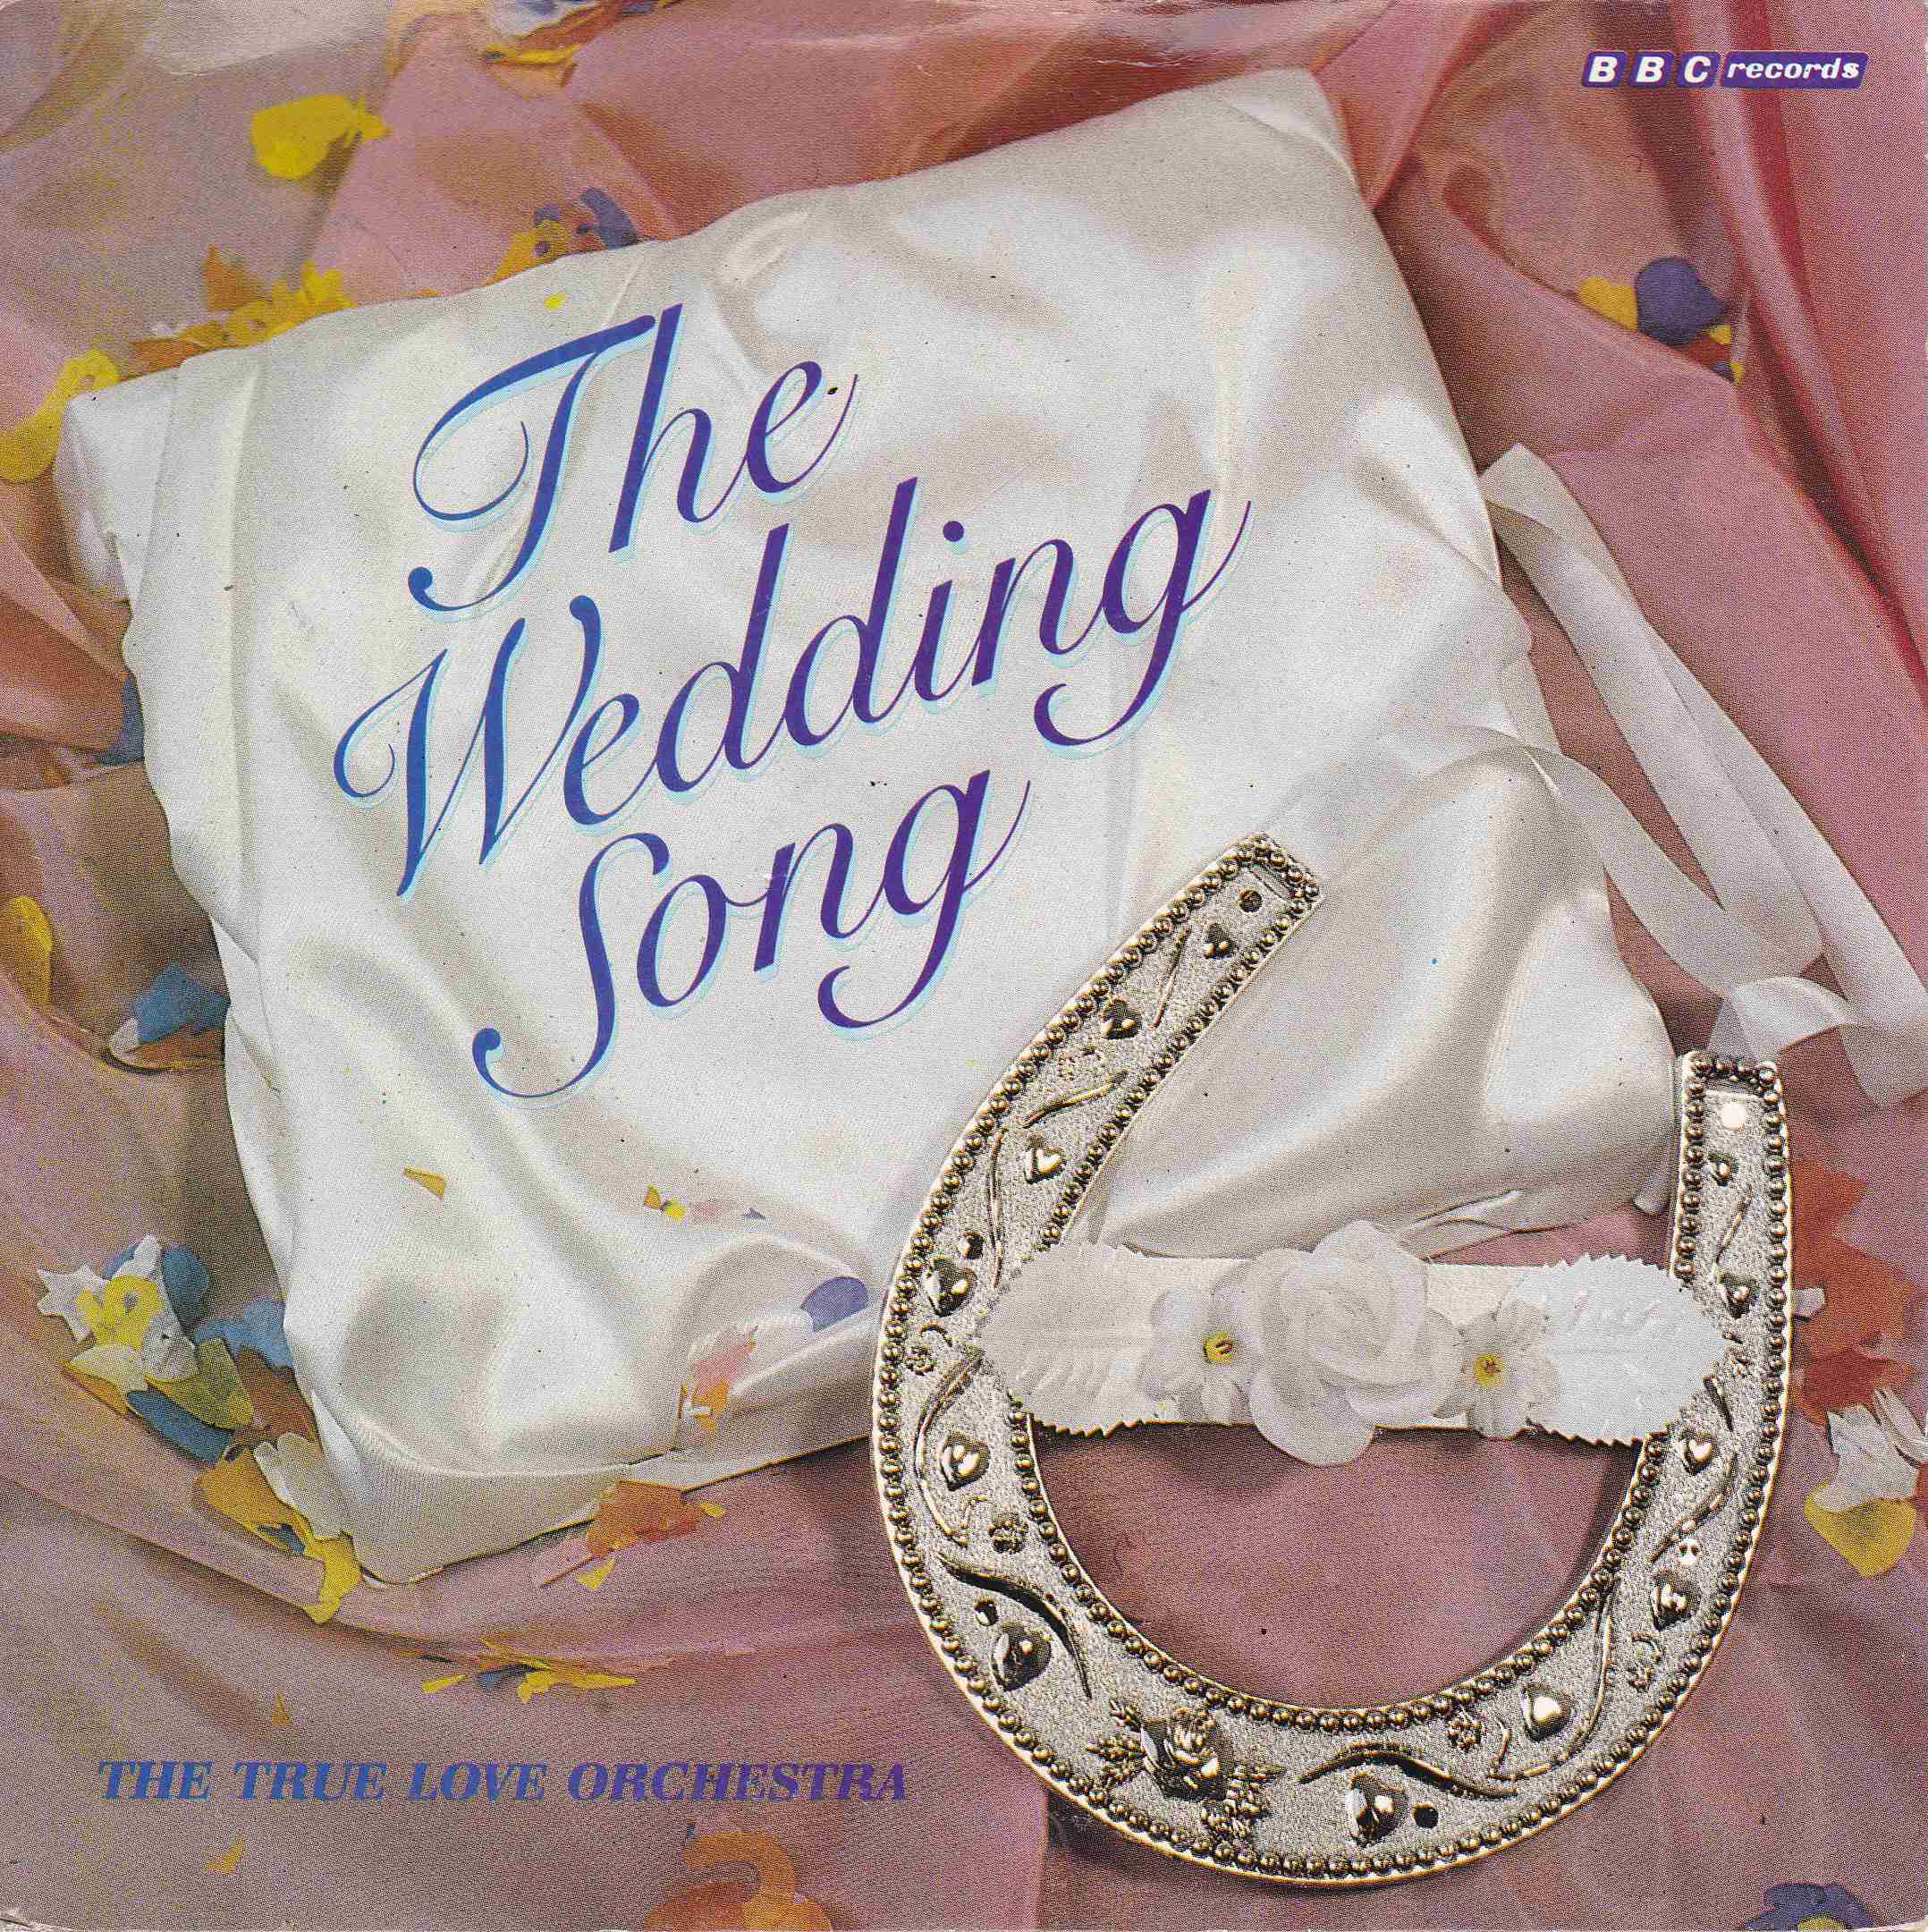 Picture of RESL 194 The wedding song by artist John MacCalman / The True Love Orchestra from the BBC singles - Records and Tapes library